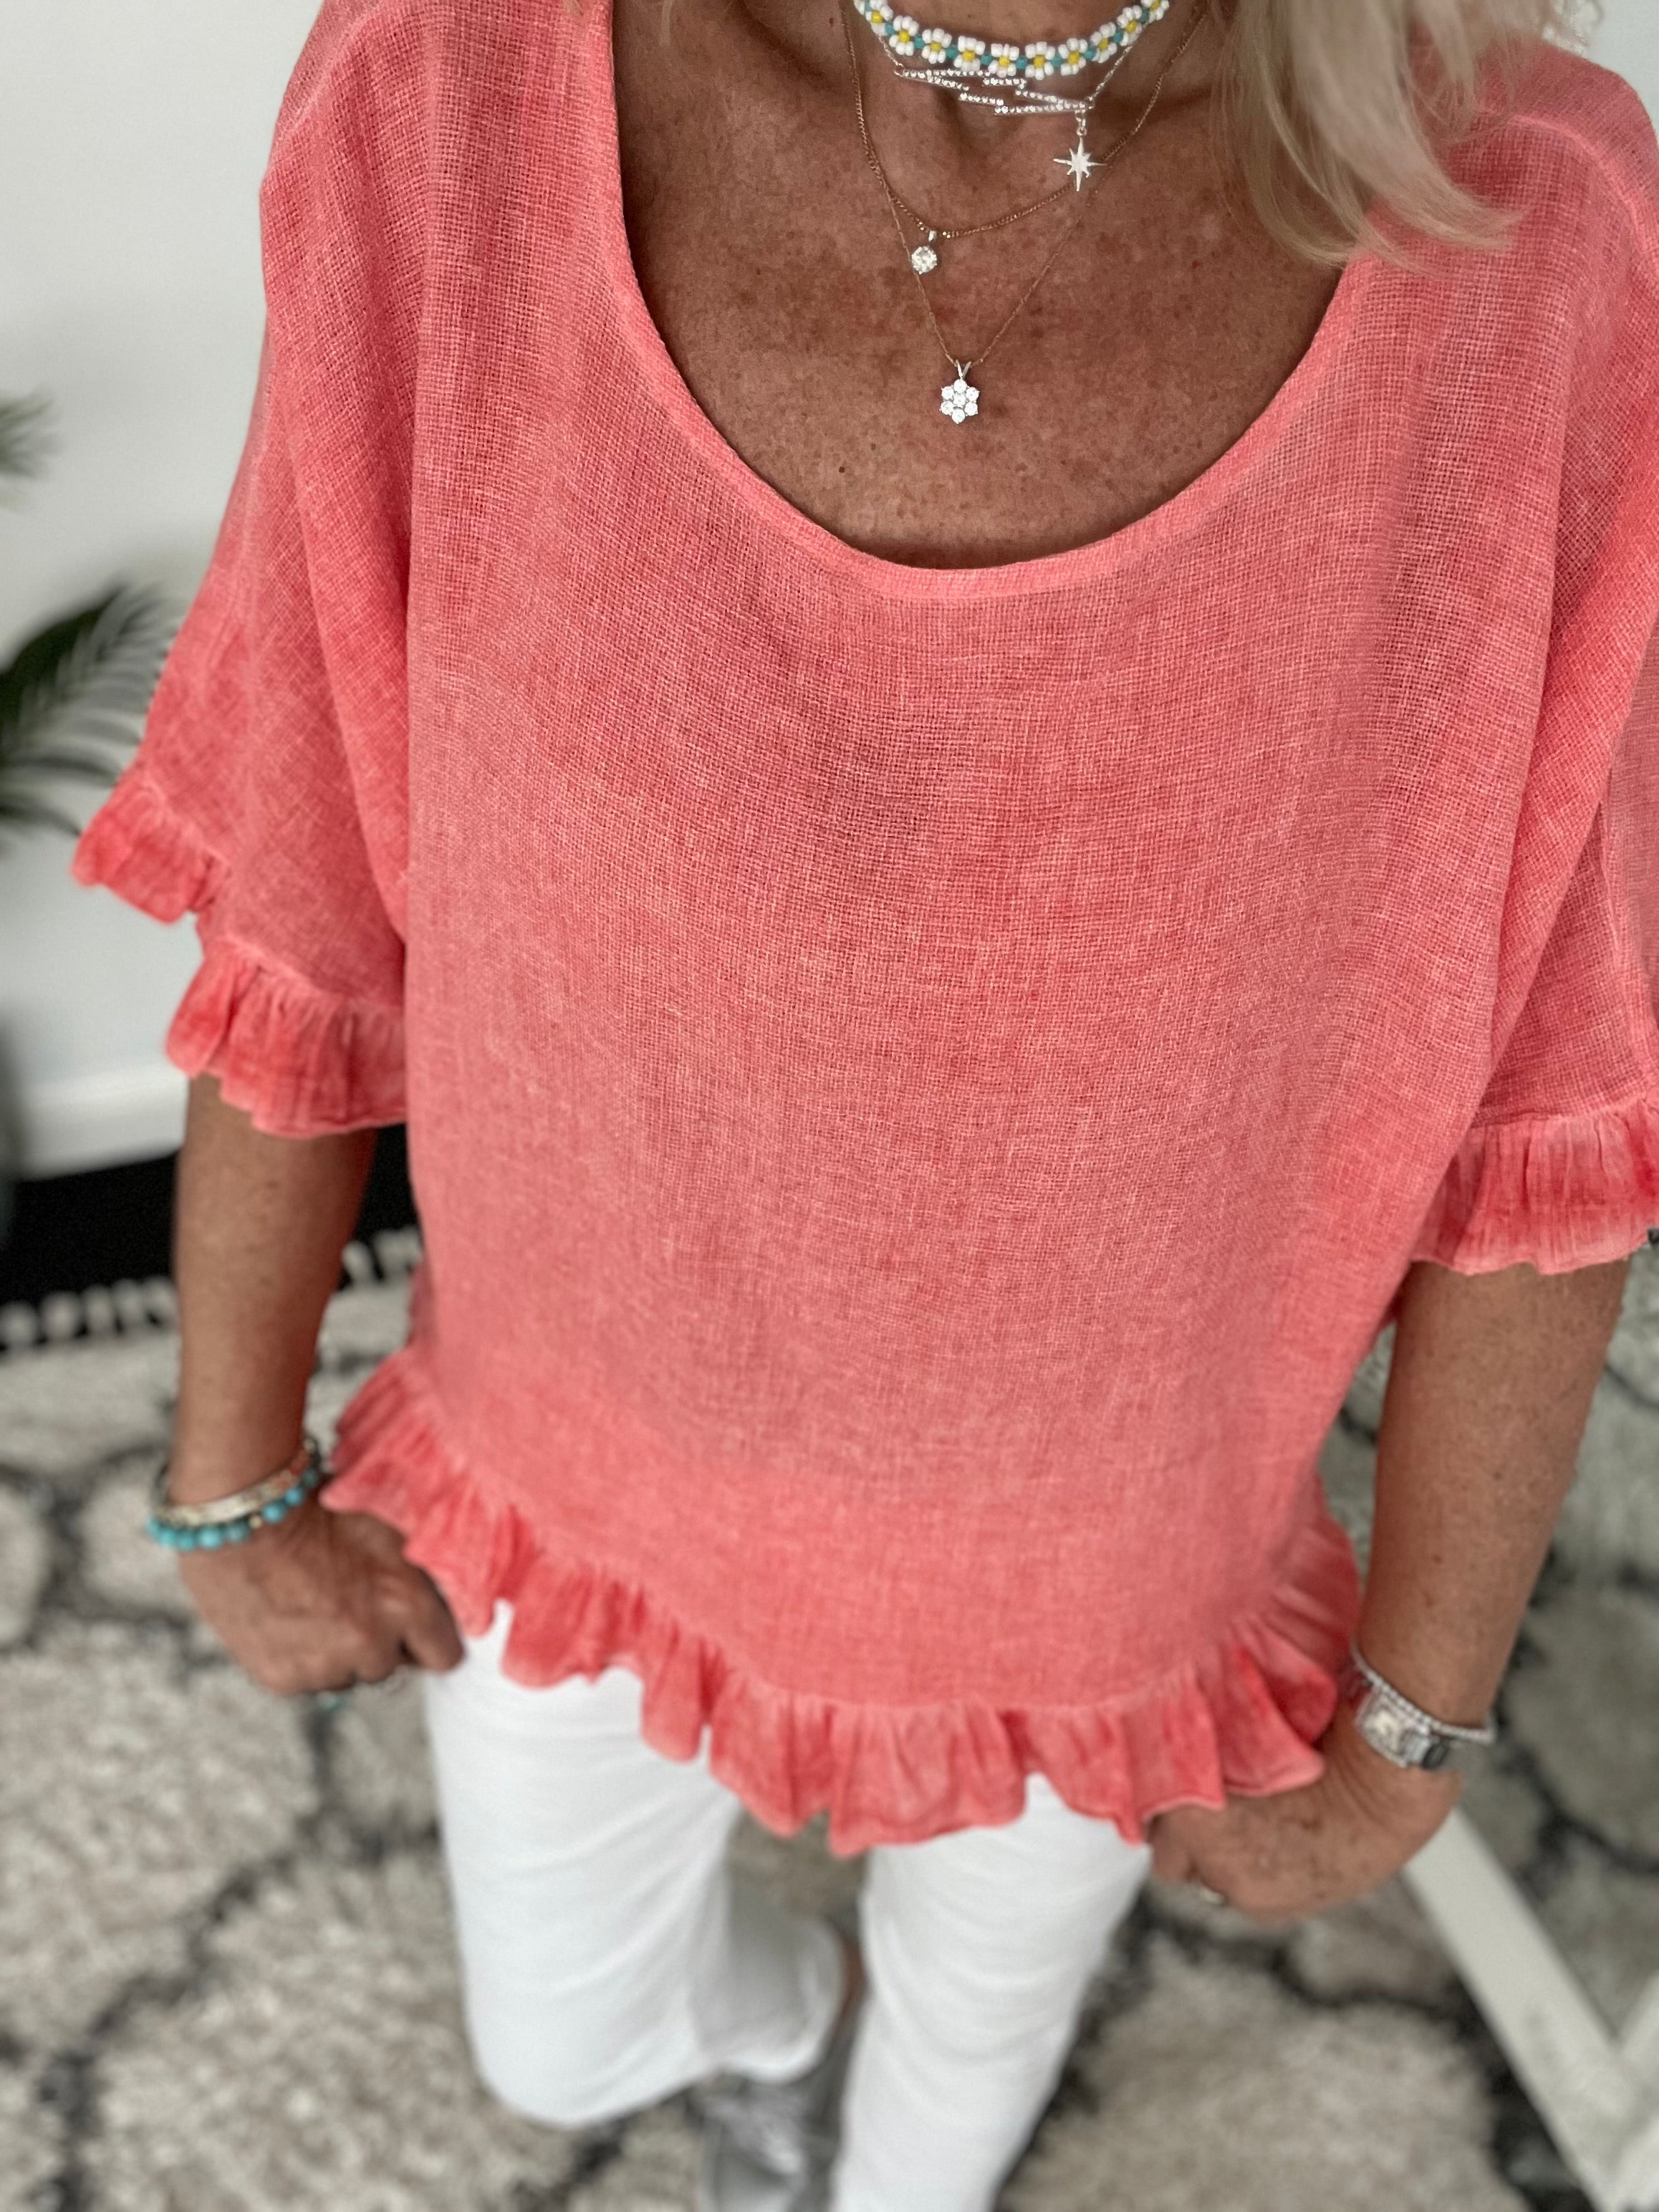 Linen & Cotton Top in Coral